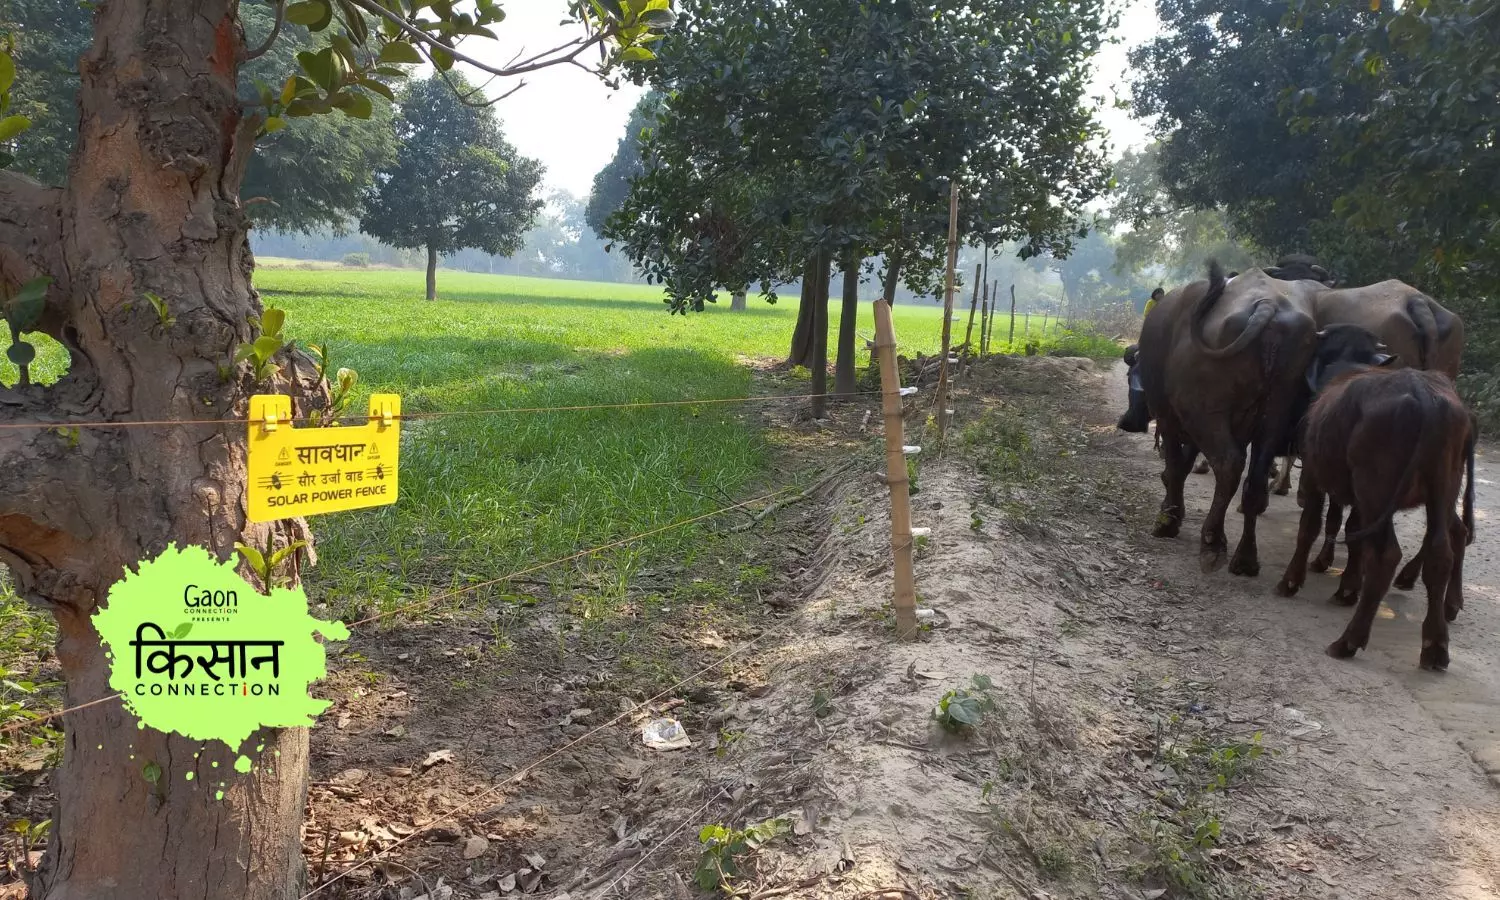 Solar Fences Keep Stray Cattle at Bay and Help Protect Crops in Unnao, UP